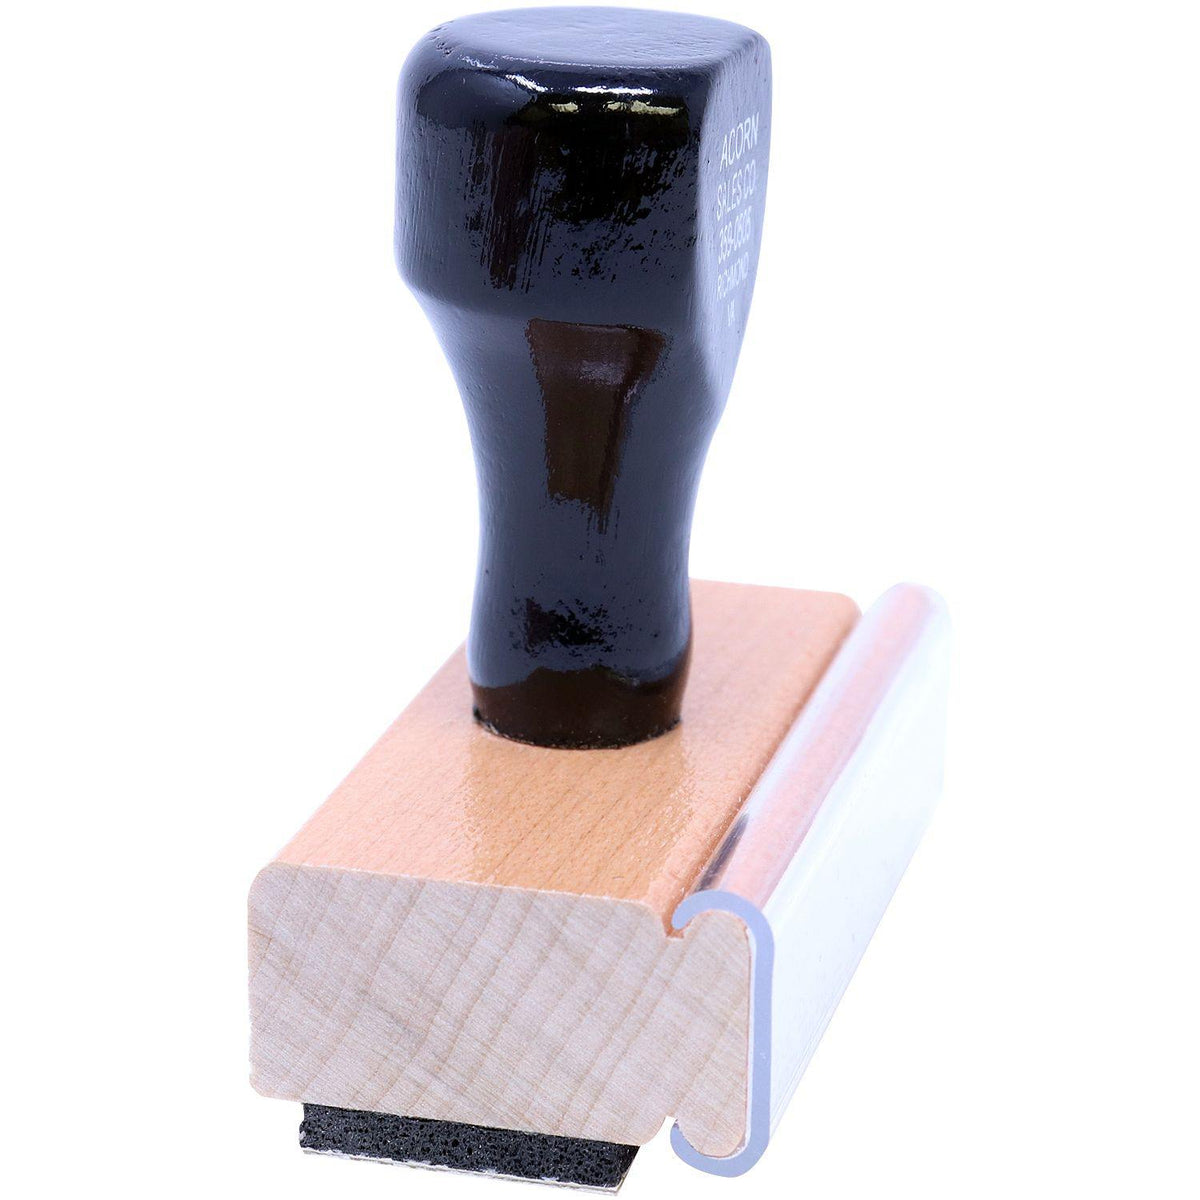 Side View of Large Received Unsealed Rubber Stamp at an Angle